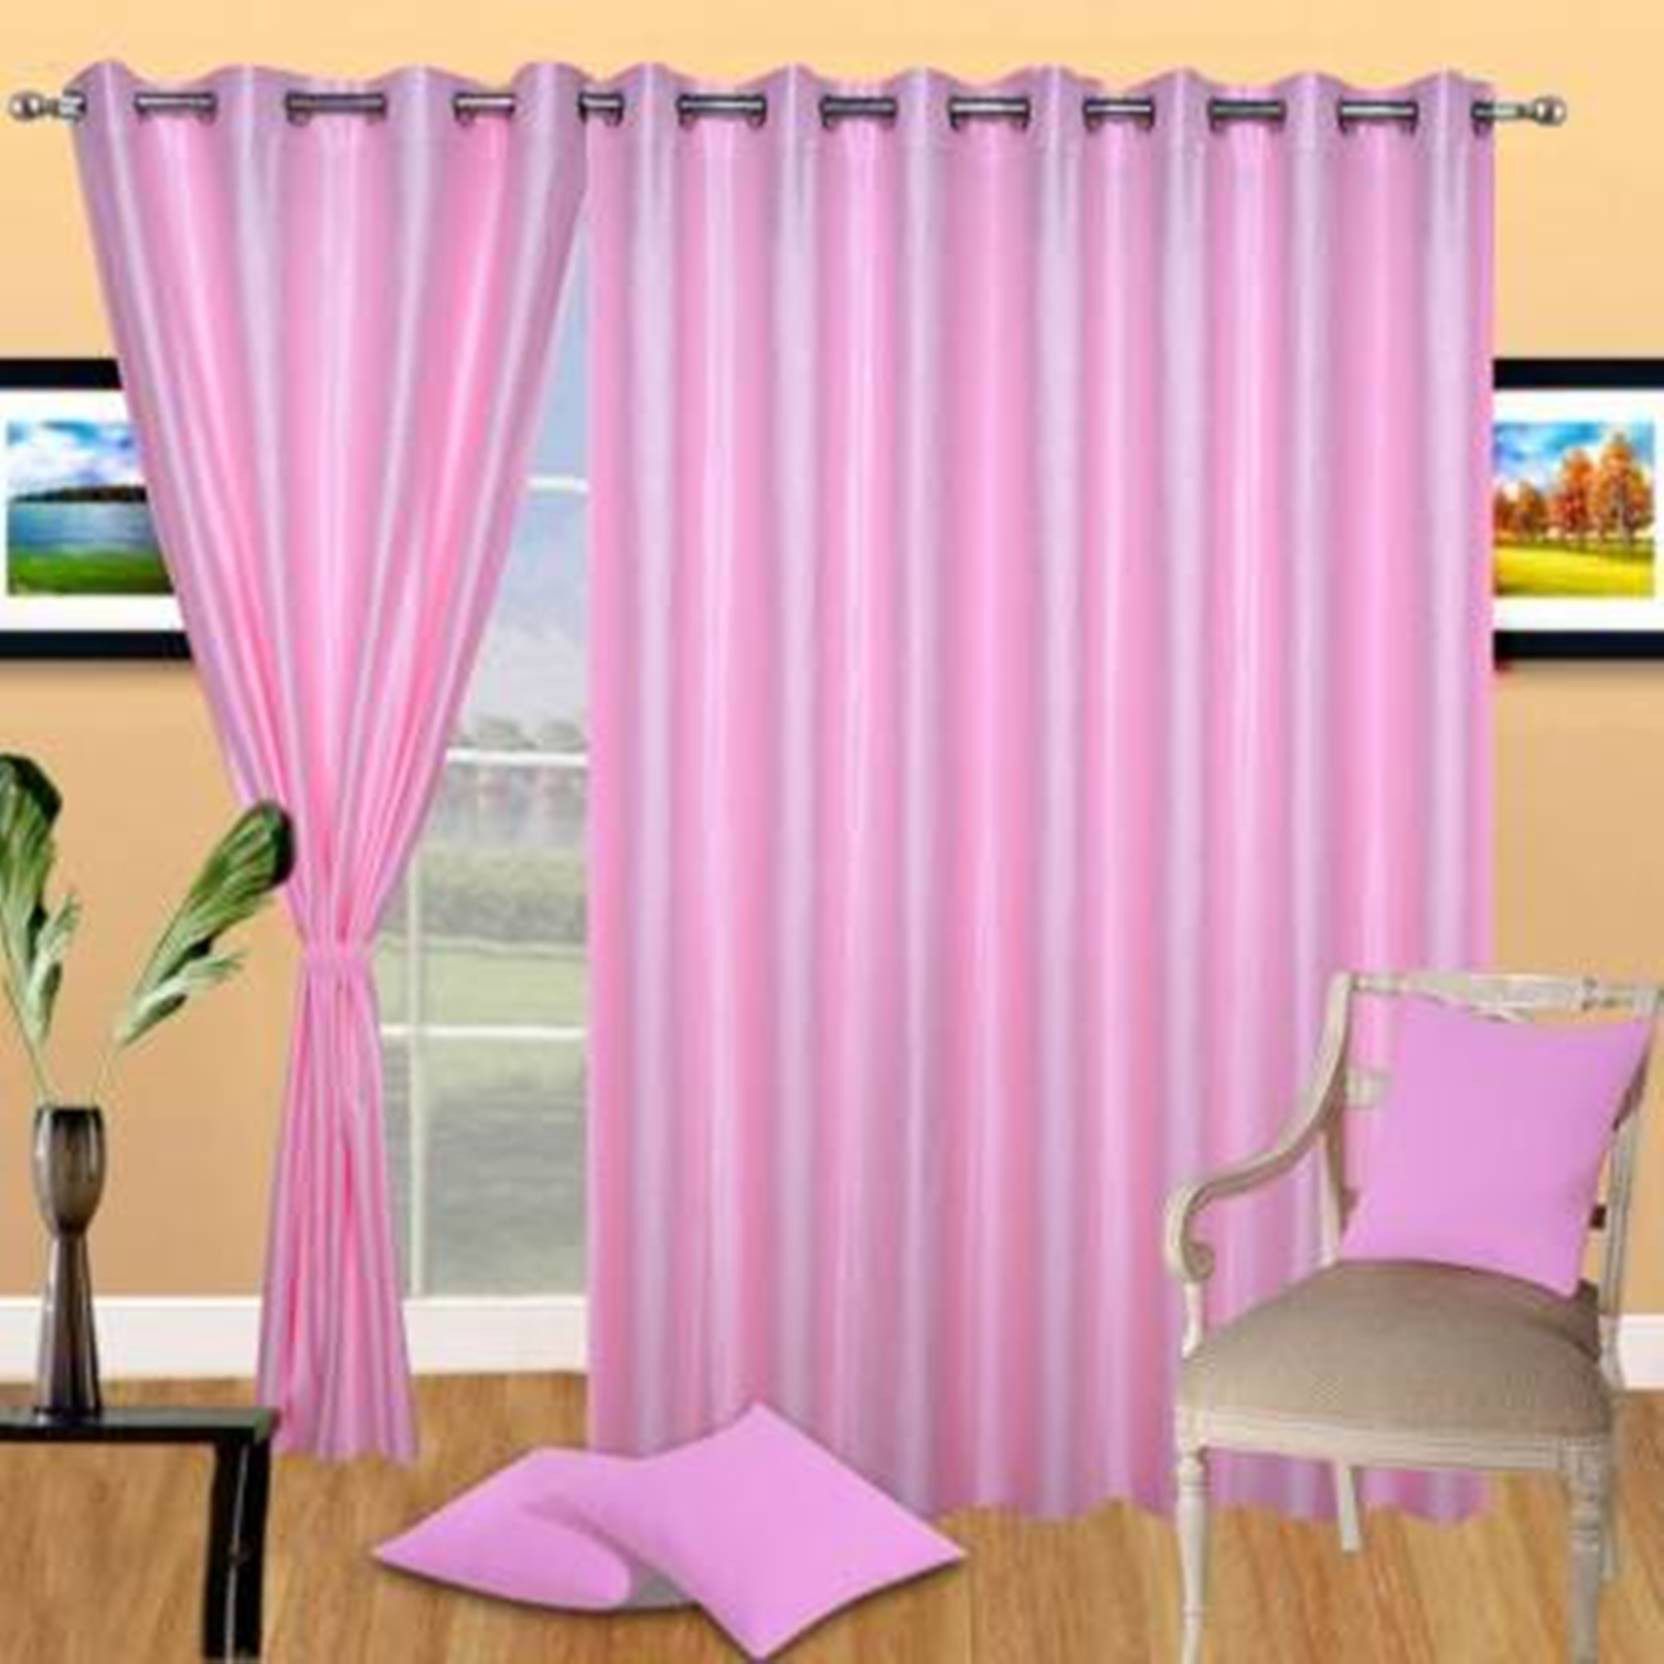     			N2C Home Solid Semi-Transparent Eyelet Curtain 5 ft ( Pack of 3 ) - Pink